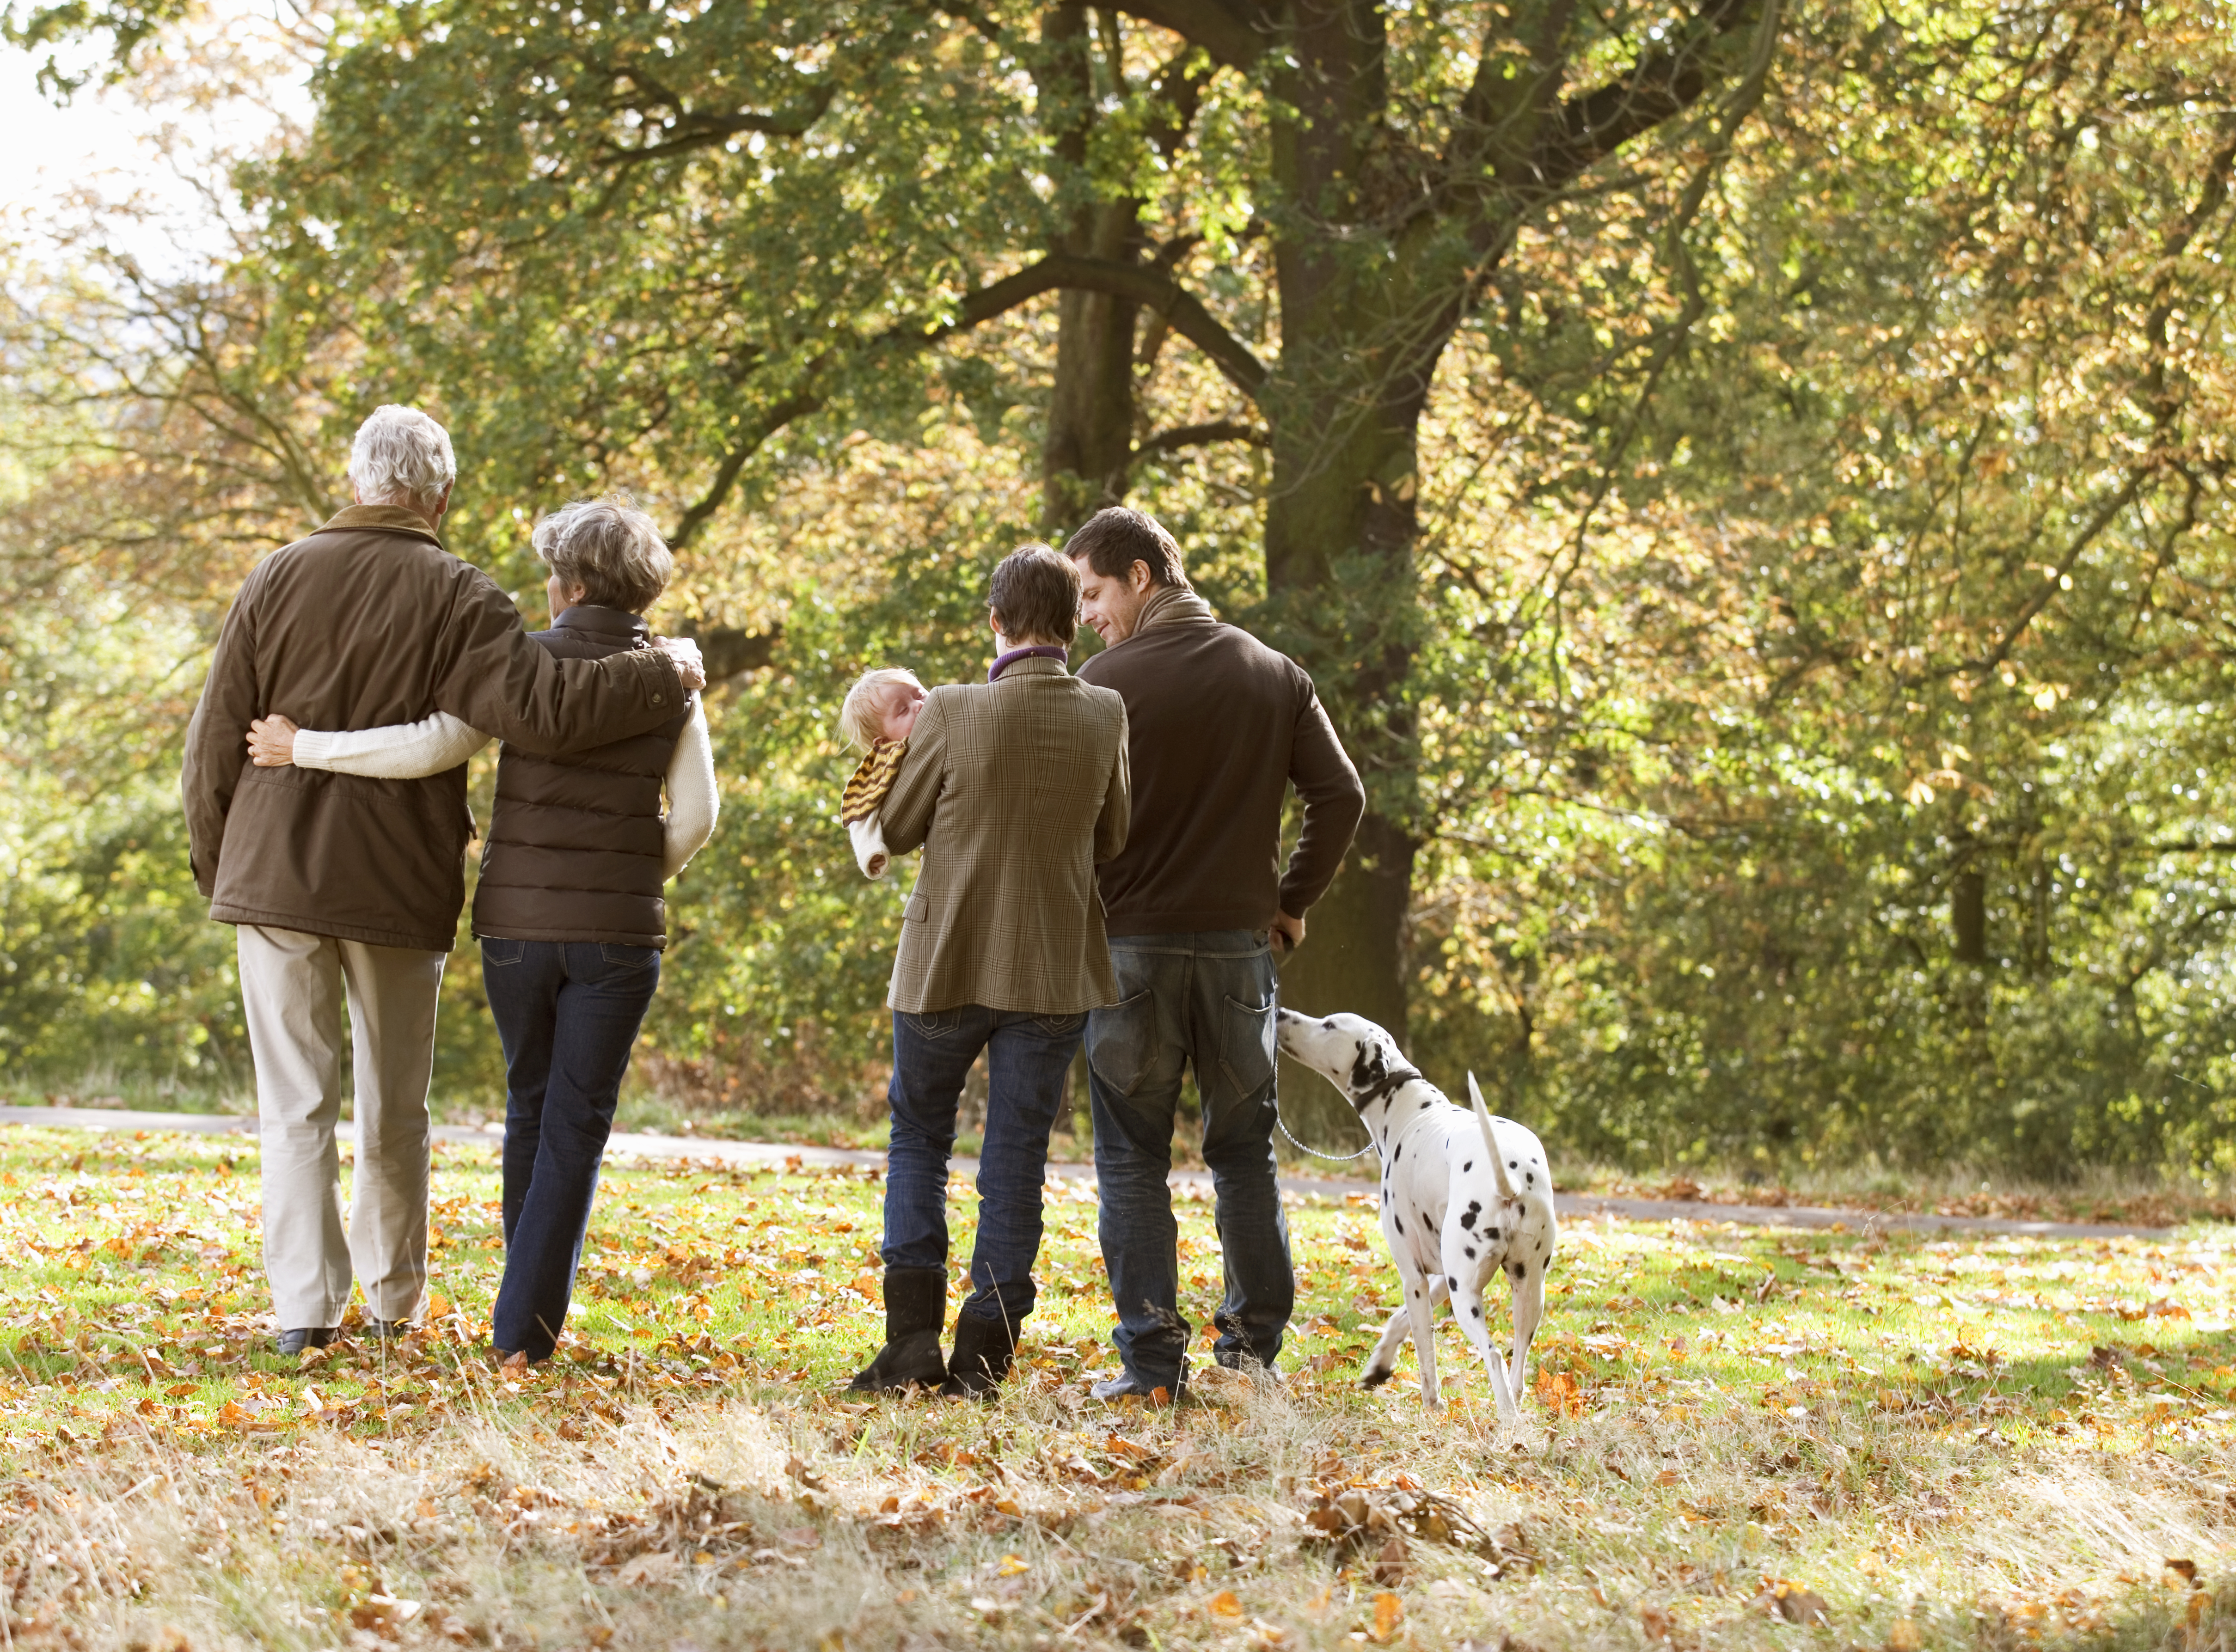 A family group walking in autumn time